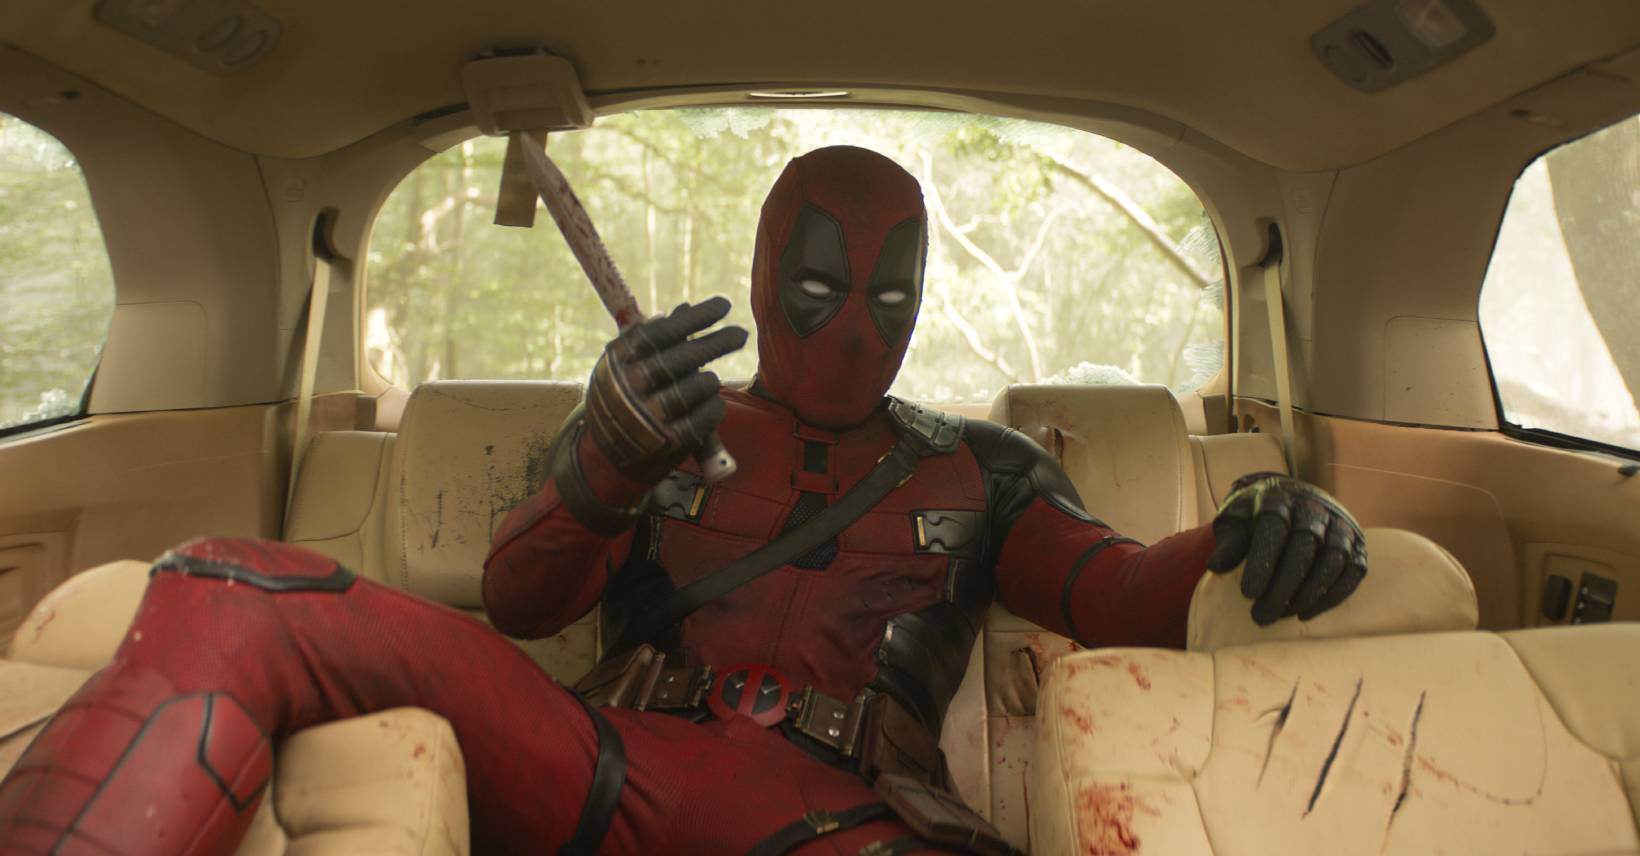 Kevin Feige hints at Deadpool 3 crossing over with more MCU projects than just Loki